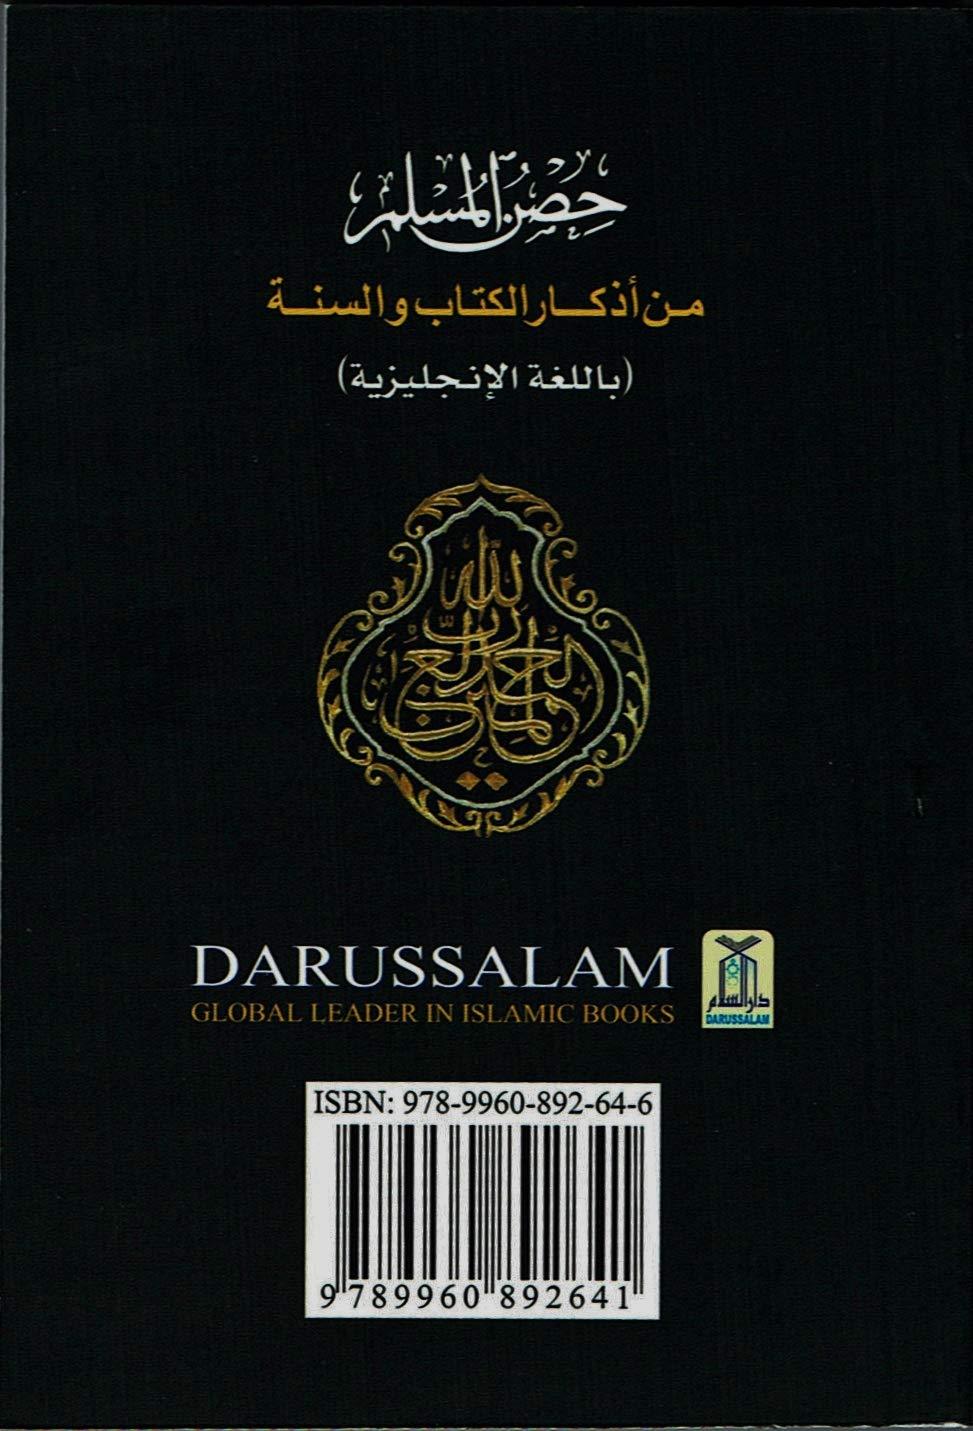 Fortress of the Muslim - 100 Pack sale ! FREE POSTAGE